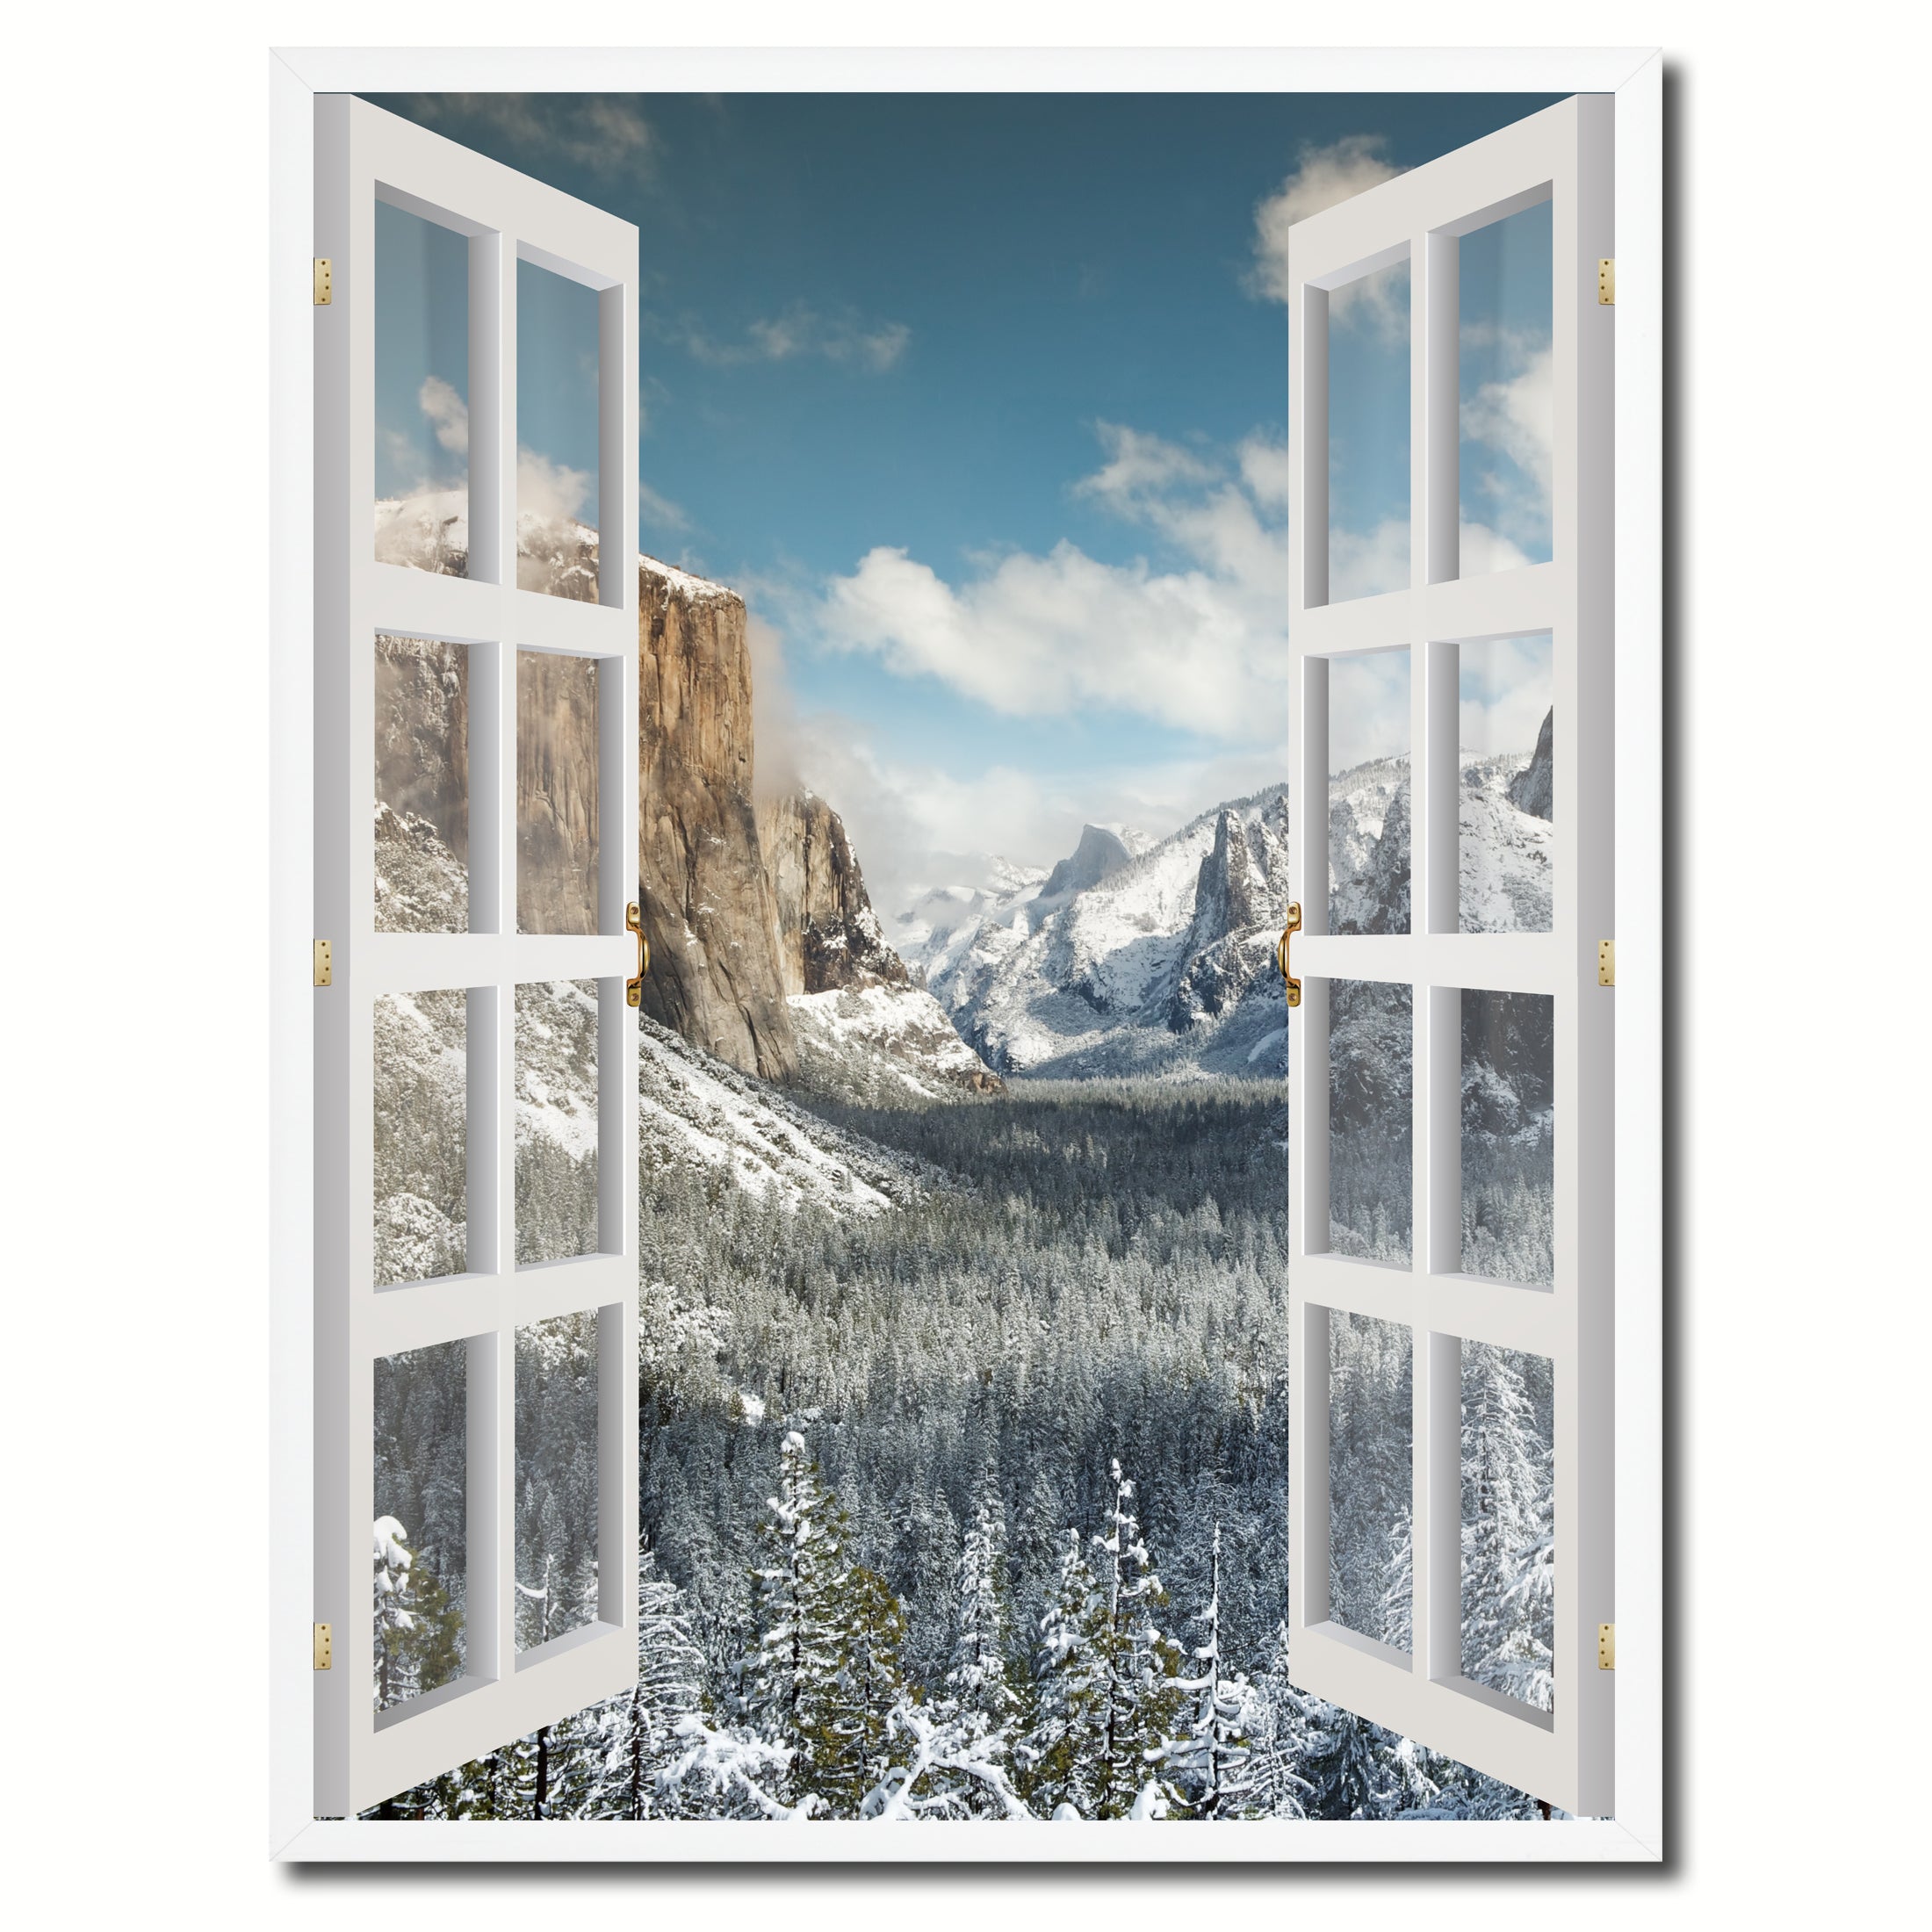 Bridal Veil Falls Yosemite National Park Winter Picture French Window Canvas Print with Frame Gifts Home Decor Wall Art Collection